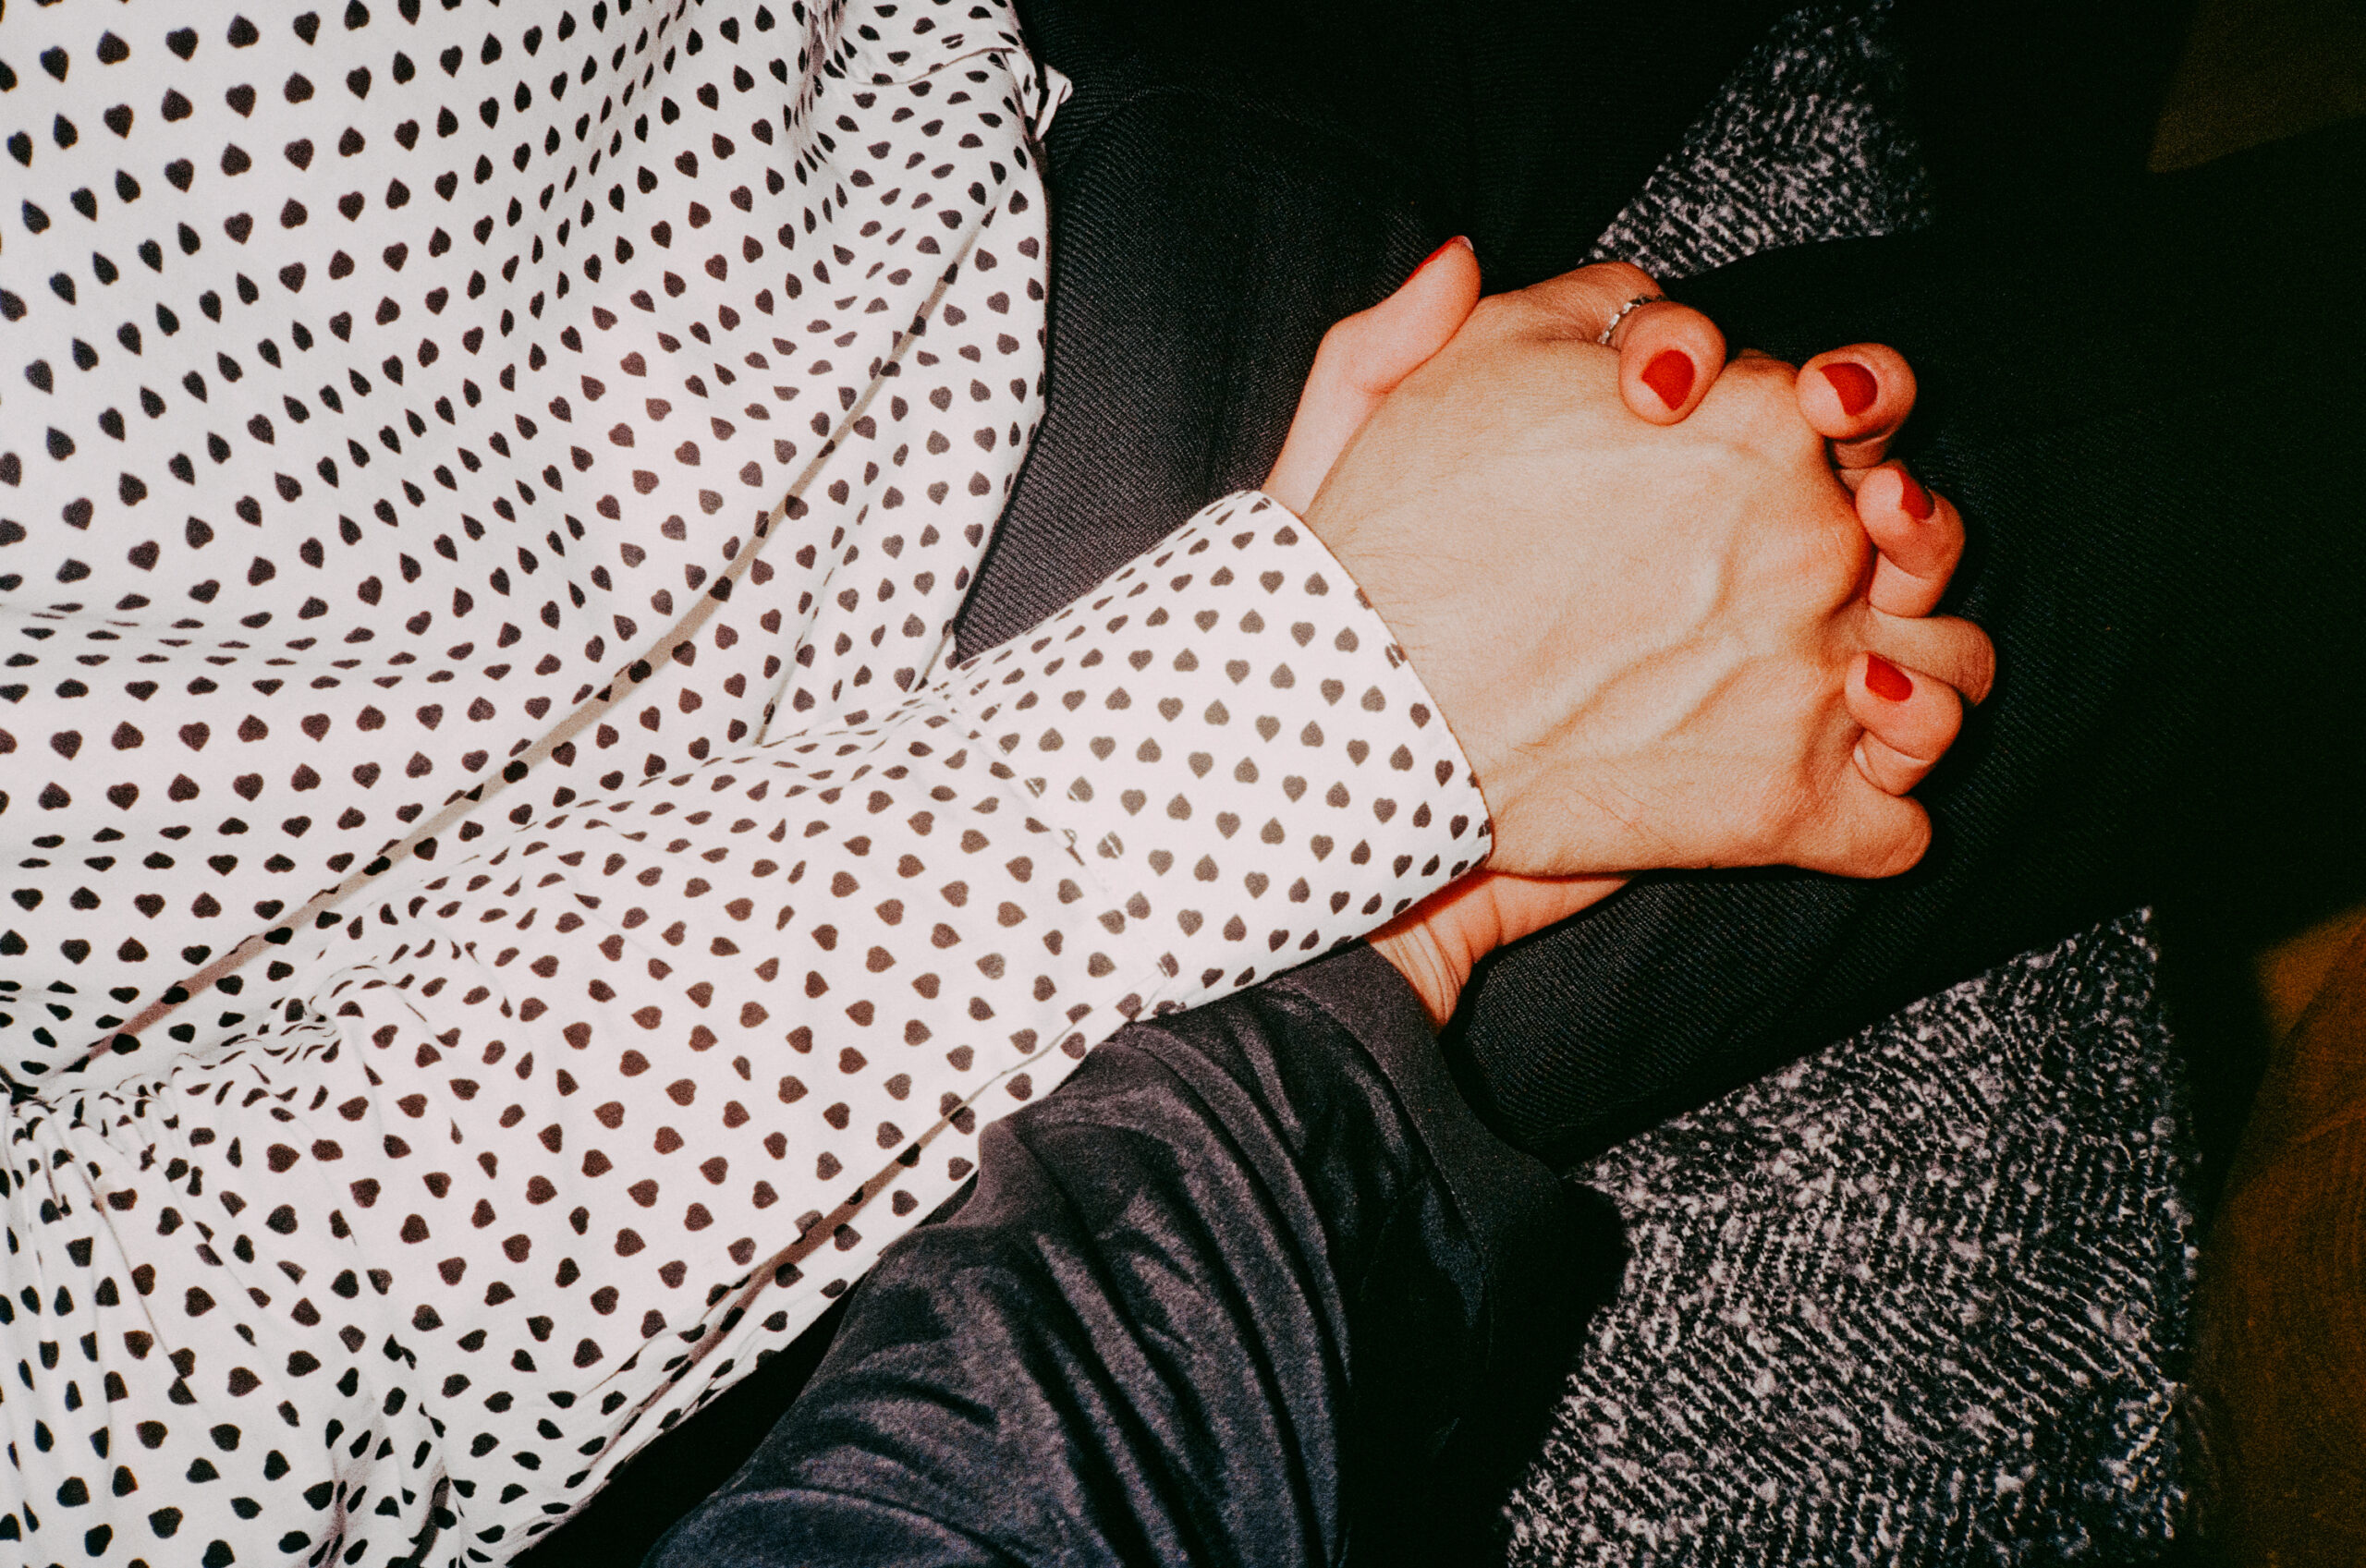 European Month of Photography: Beim European Month of Photography zu sehen: Holding Hands with You. Foto: Cherie Birkner